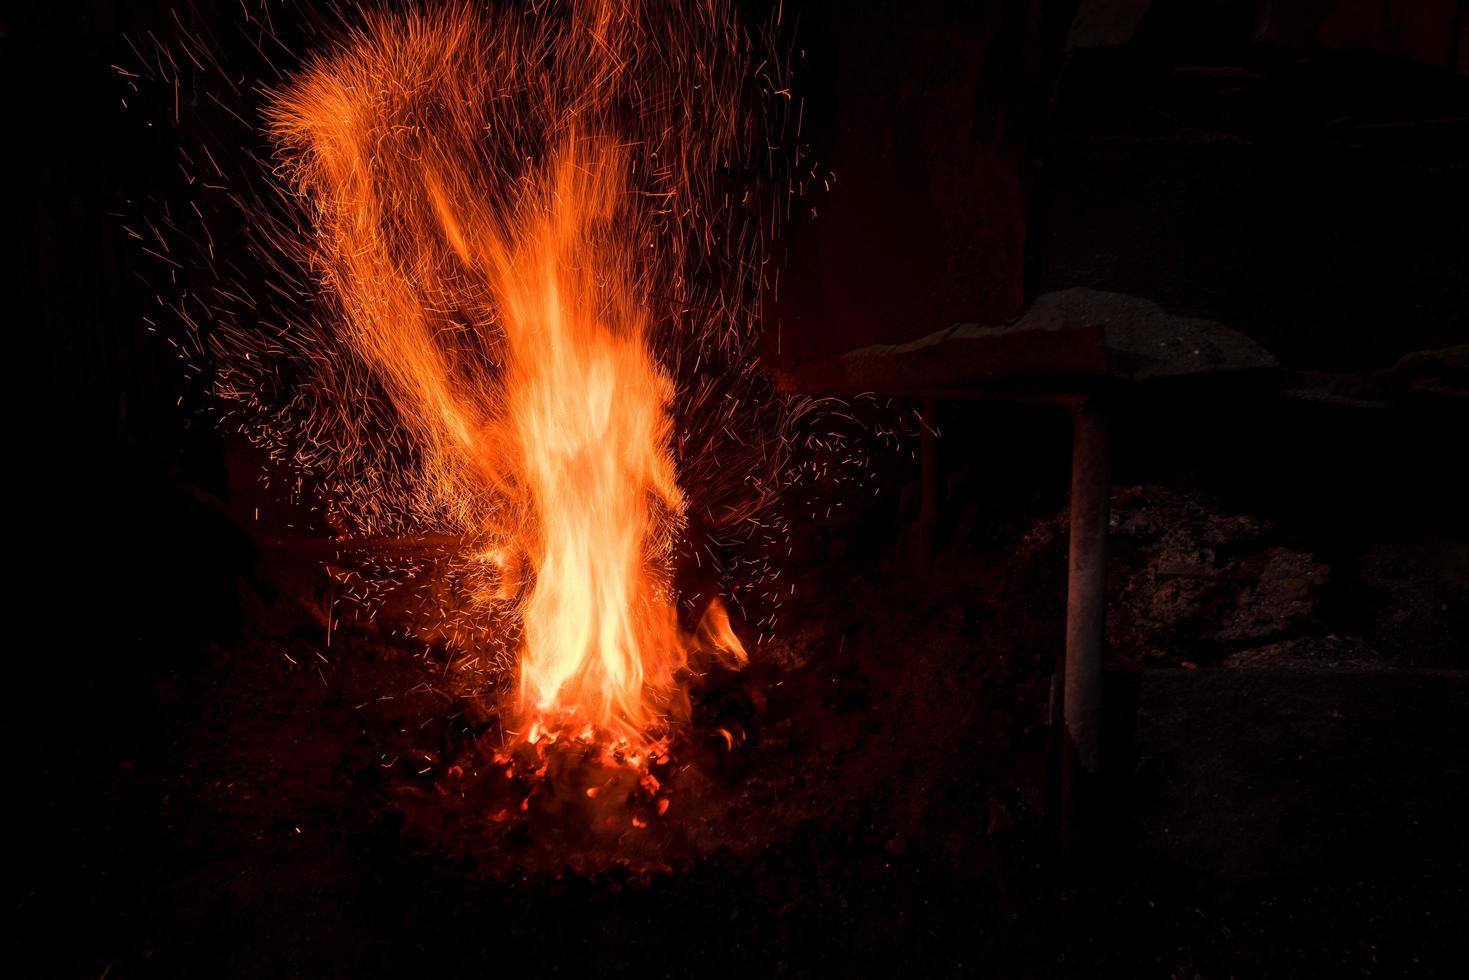 Traditional blacksmith furnace with burning fire photo